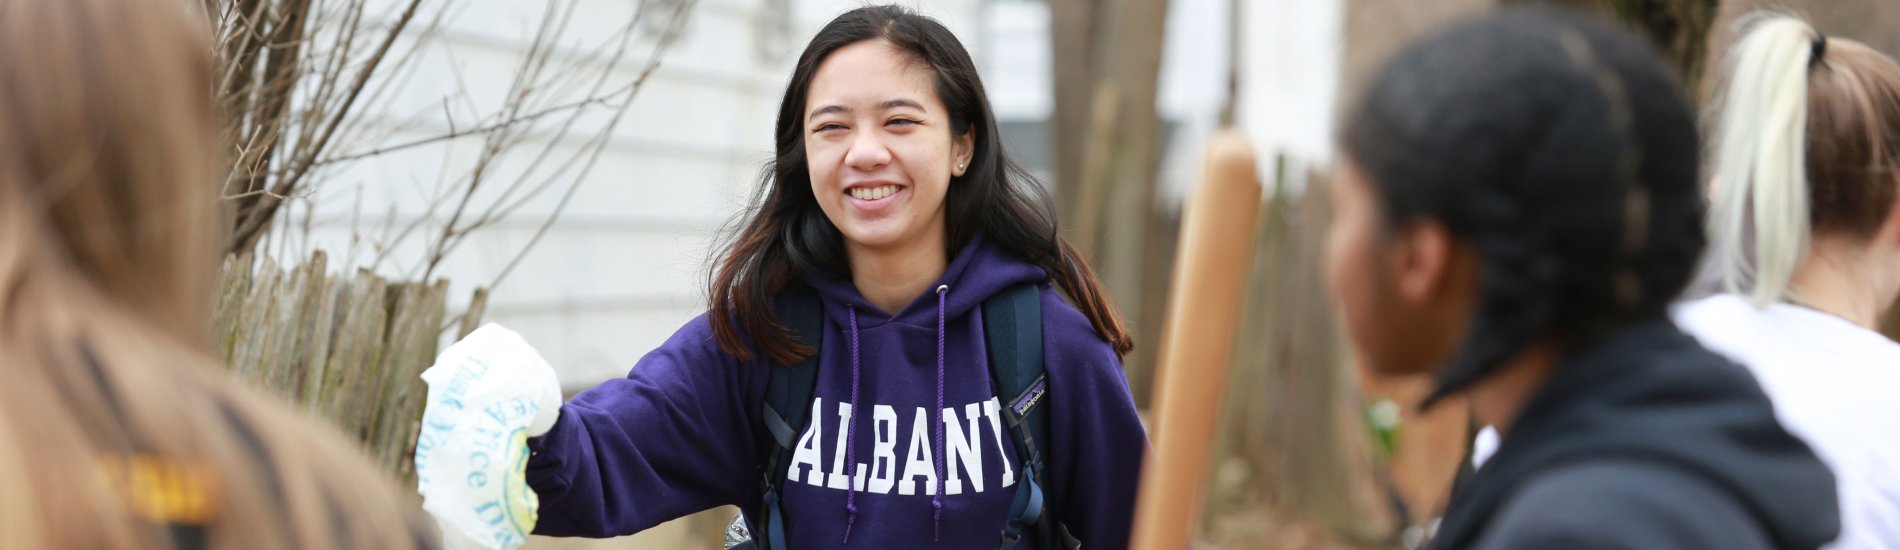 A smiling student wearing a purple UAlbany sweatshirt reaches out to throw away a piece of trash in Albany's Pine Hills neighborhood.